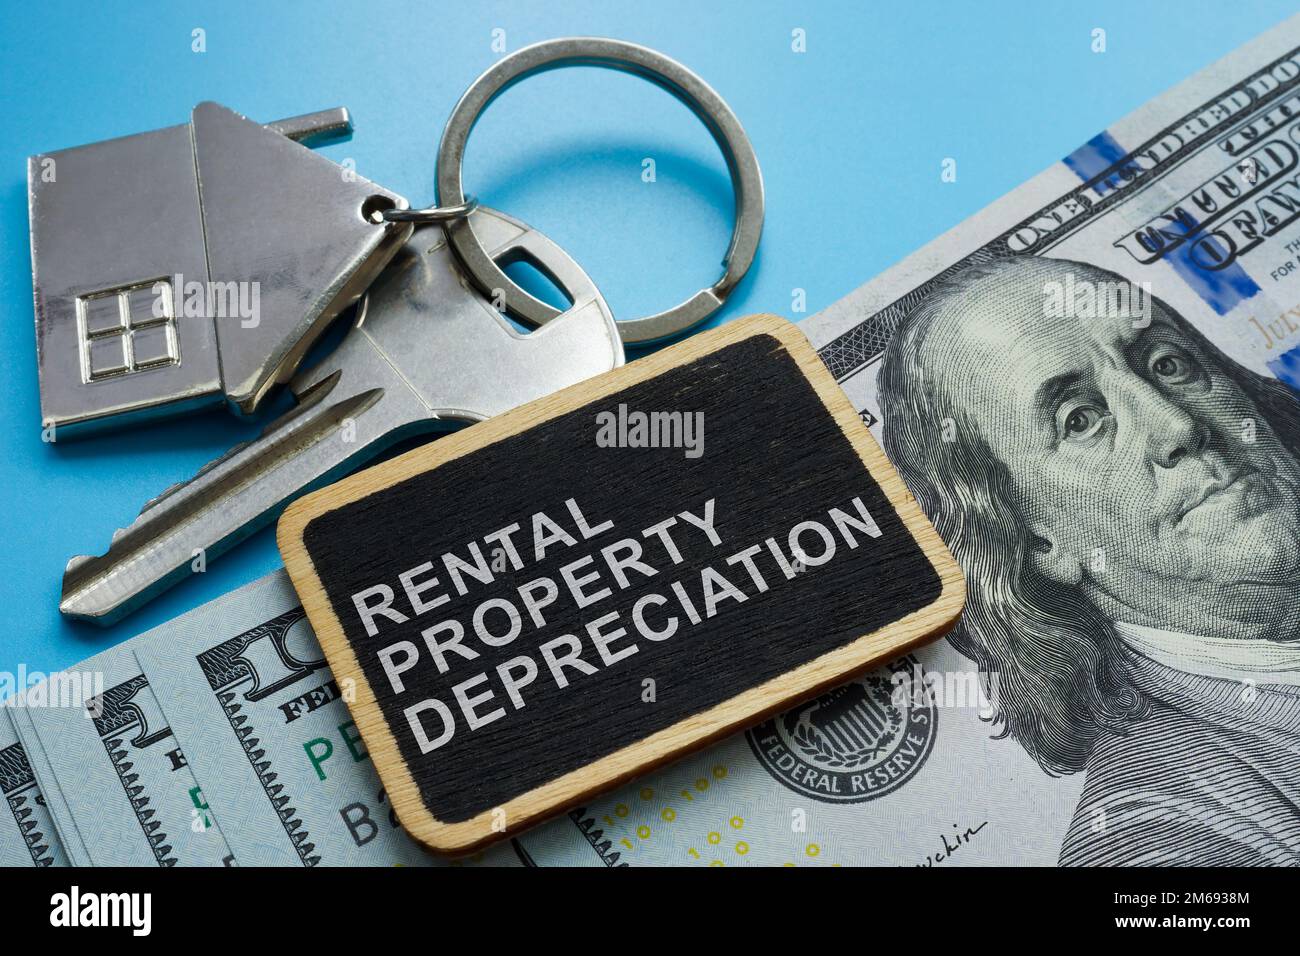 Key, cash and plate with sign Rental property depreciation. Stock Photo